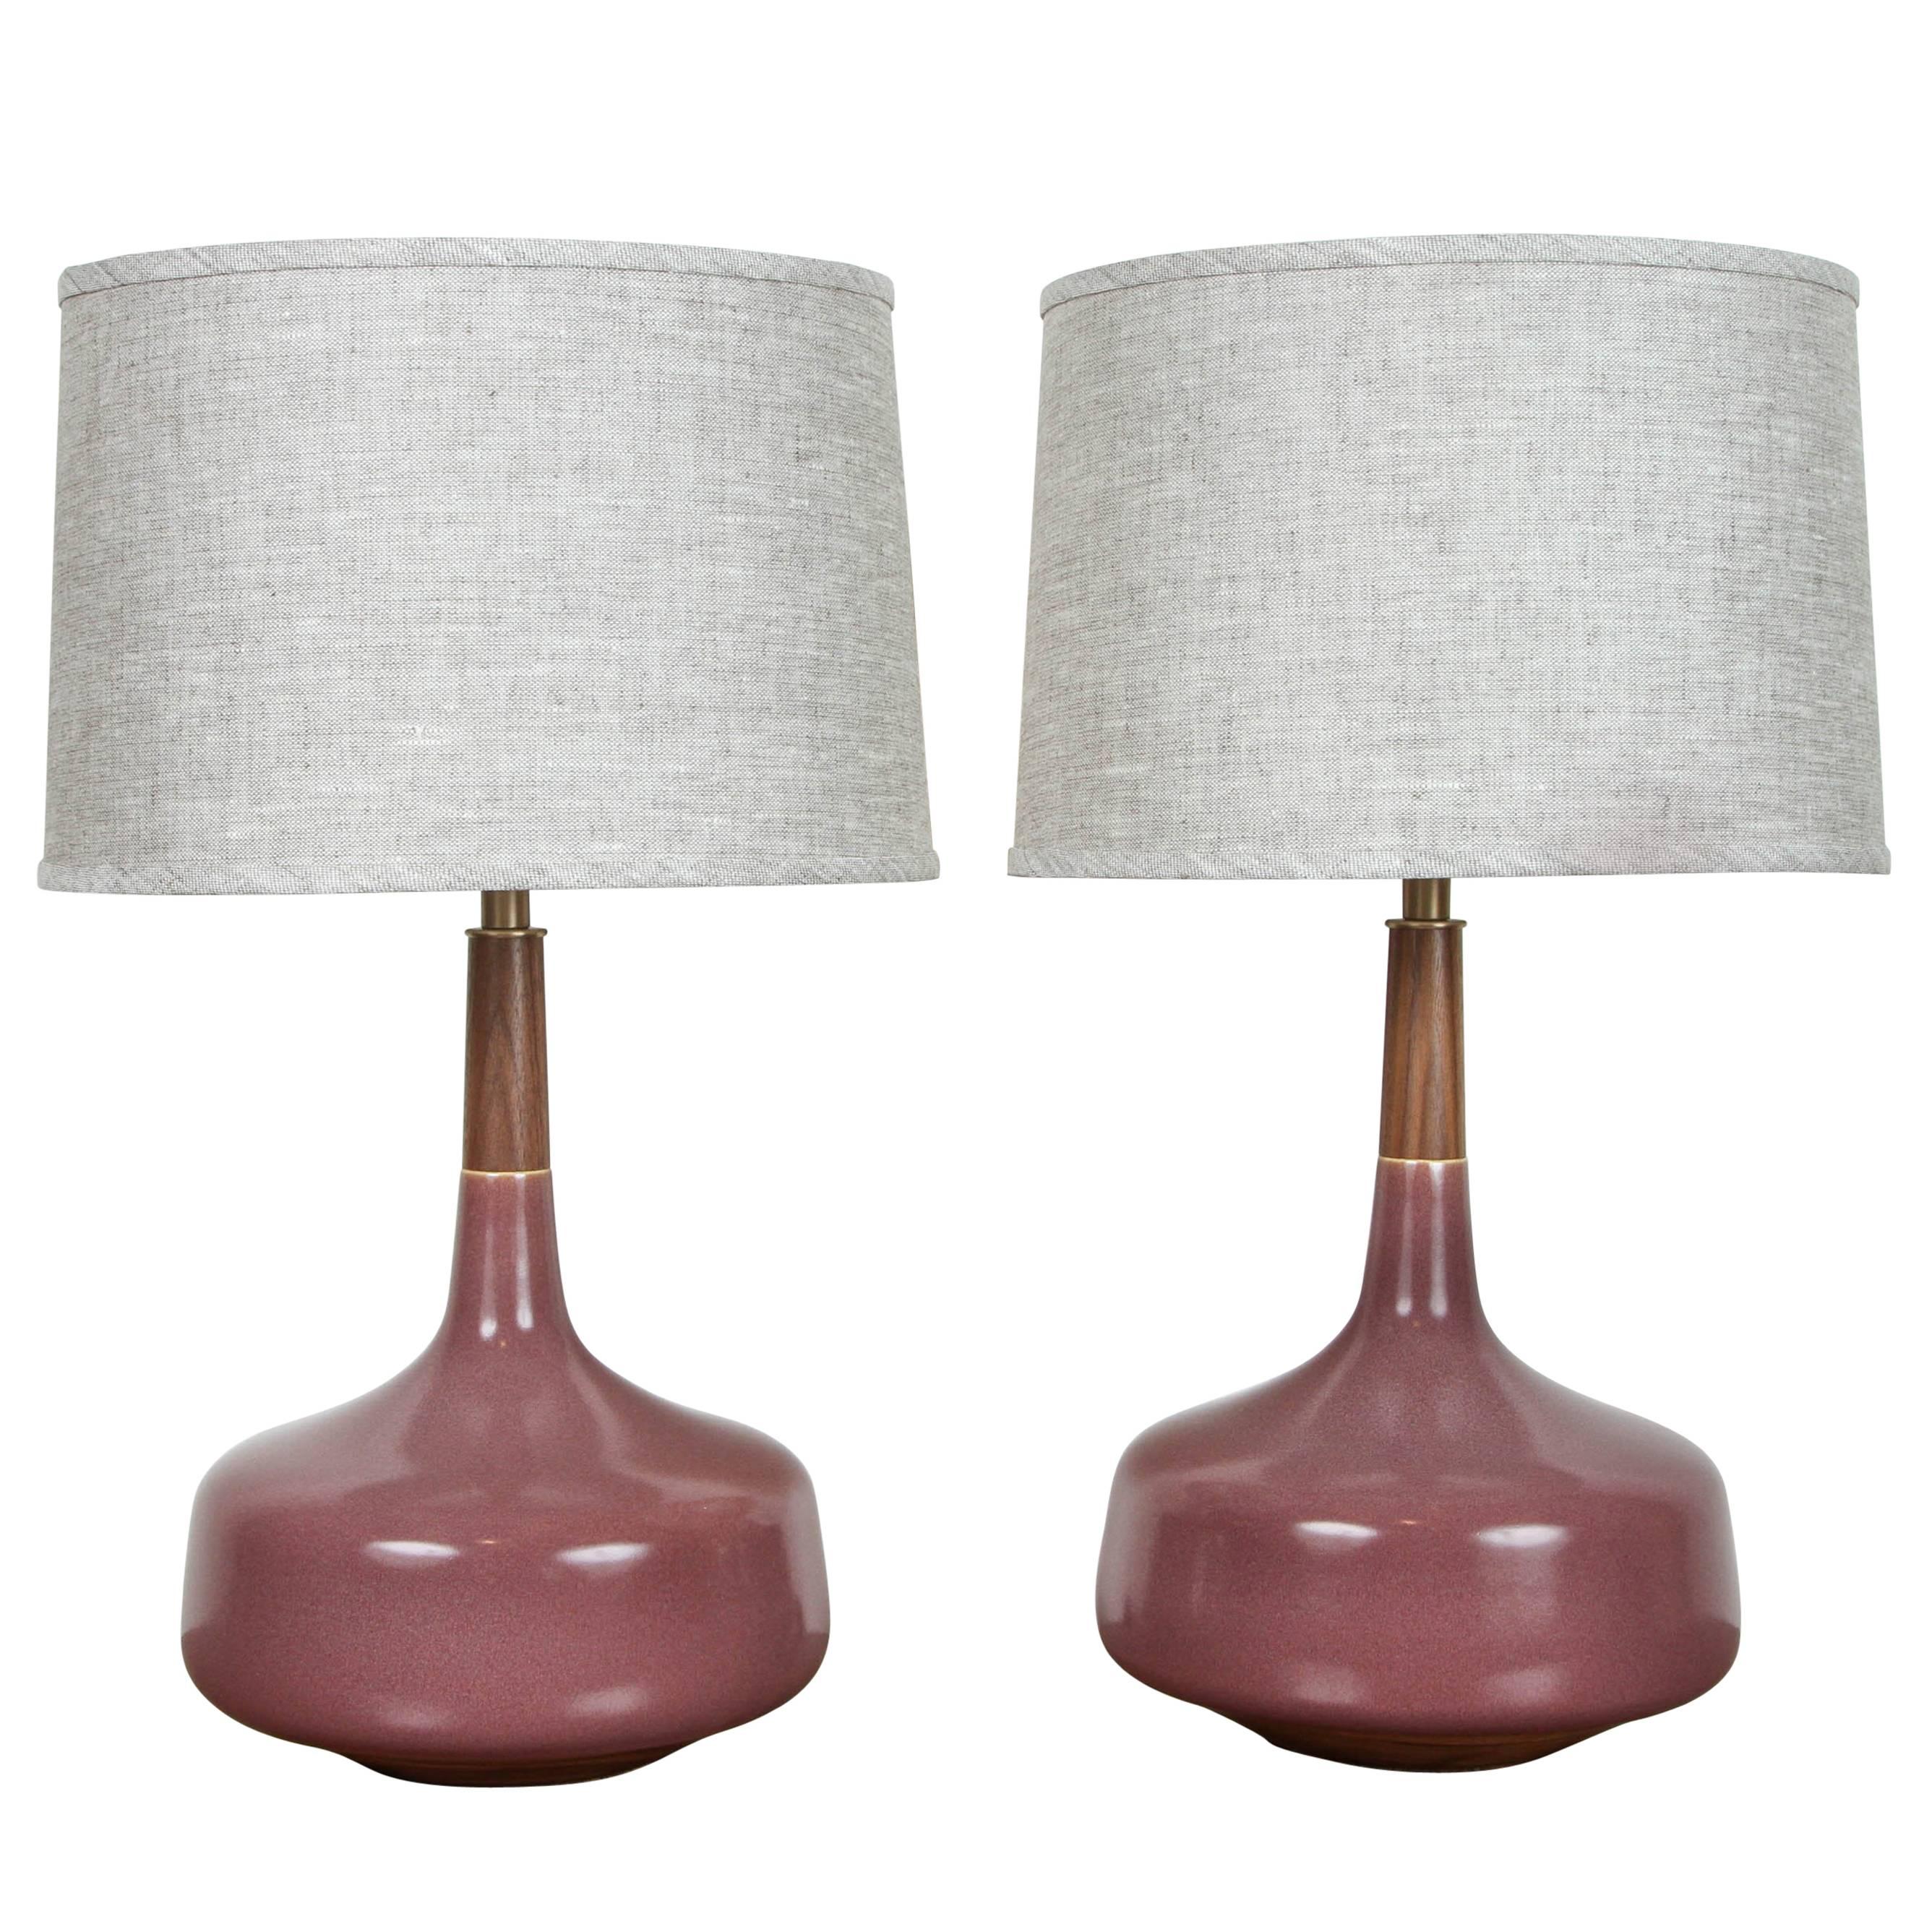 Pair of Hilo Lamps by Stone and Sawyer for Lawson-Fenning